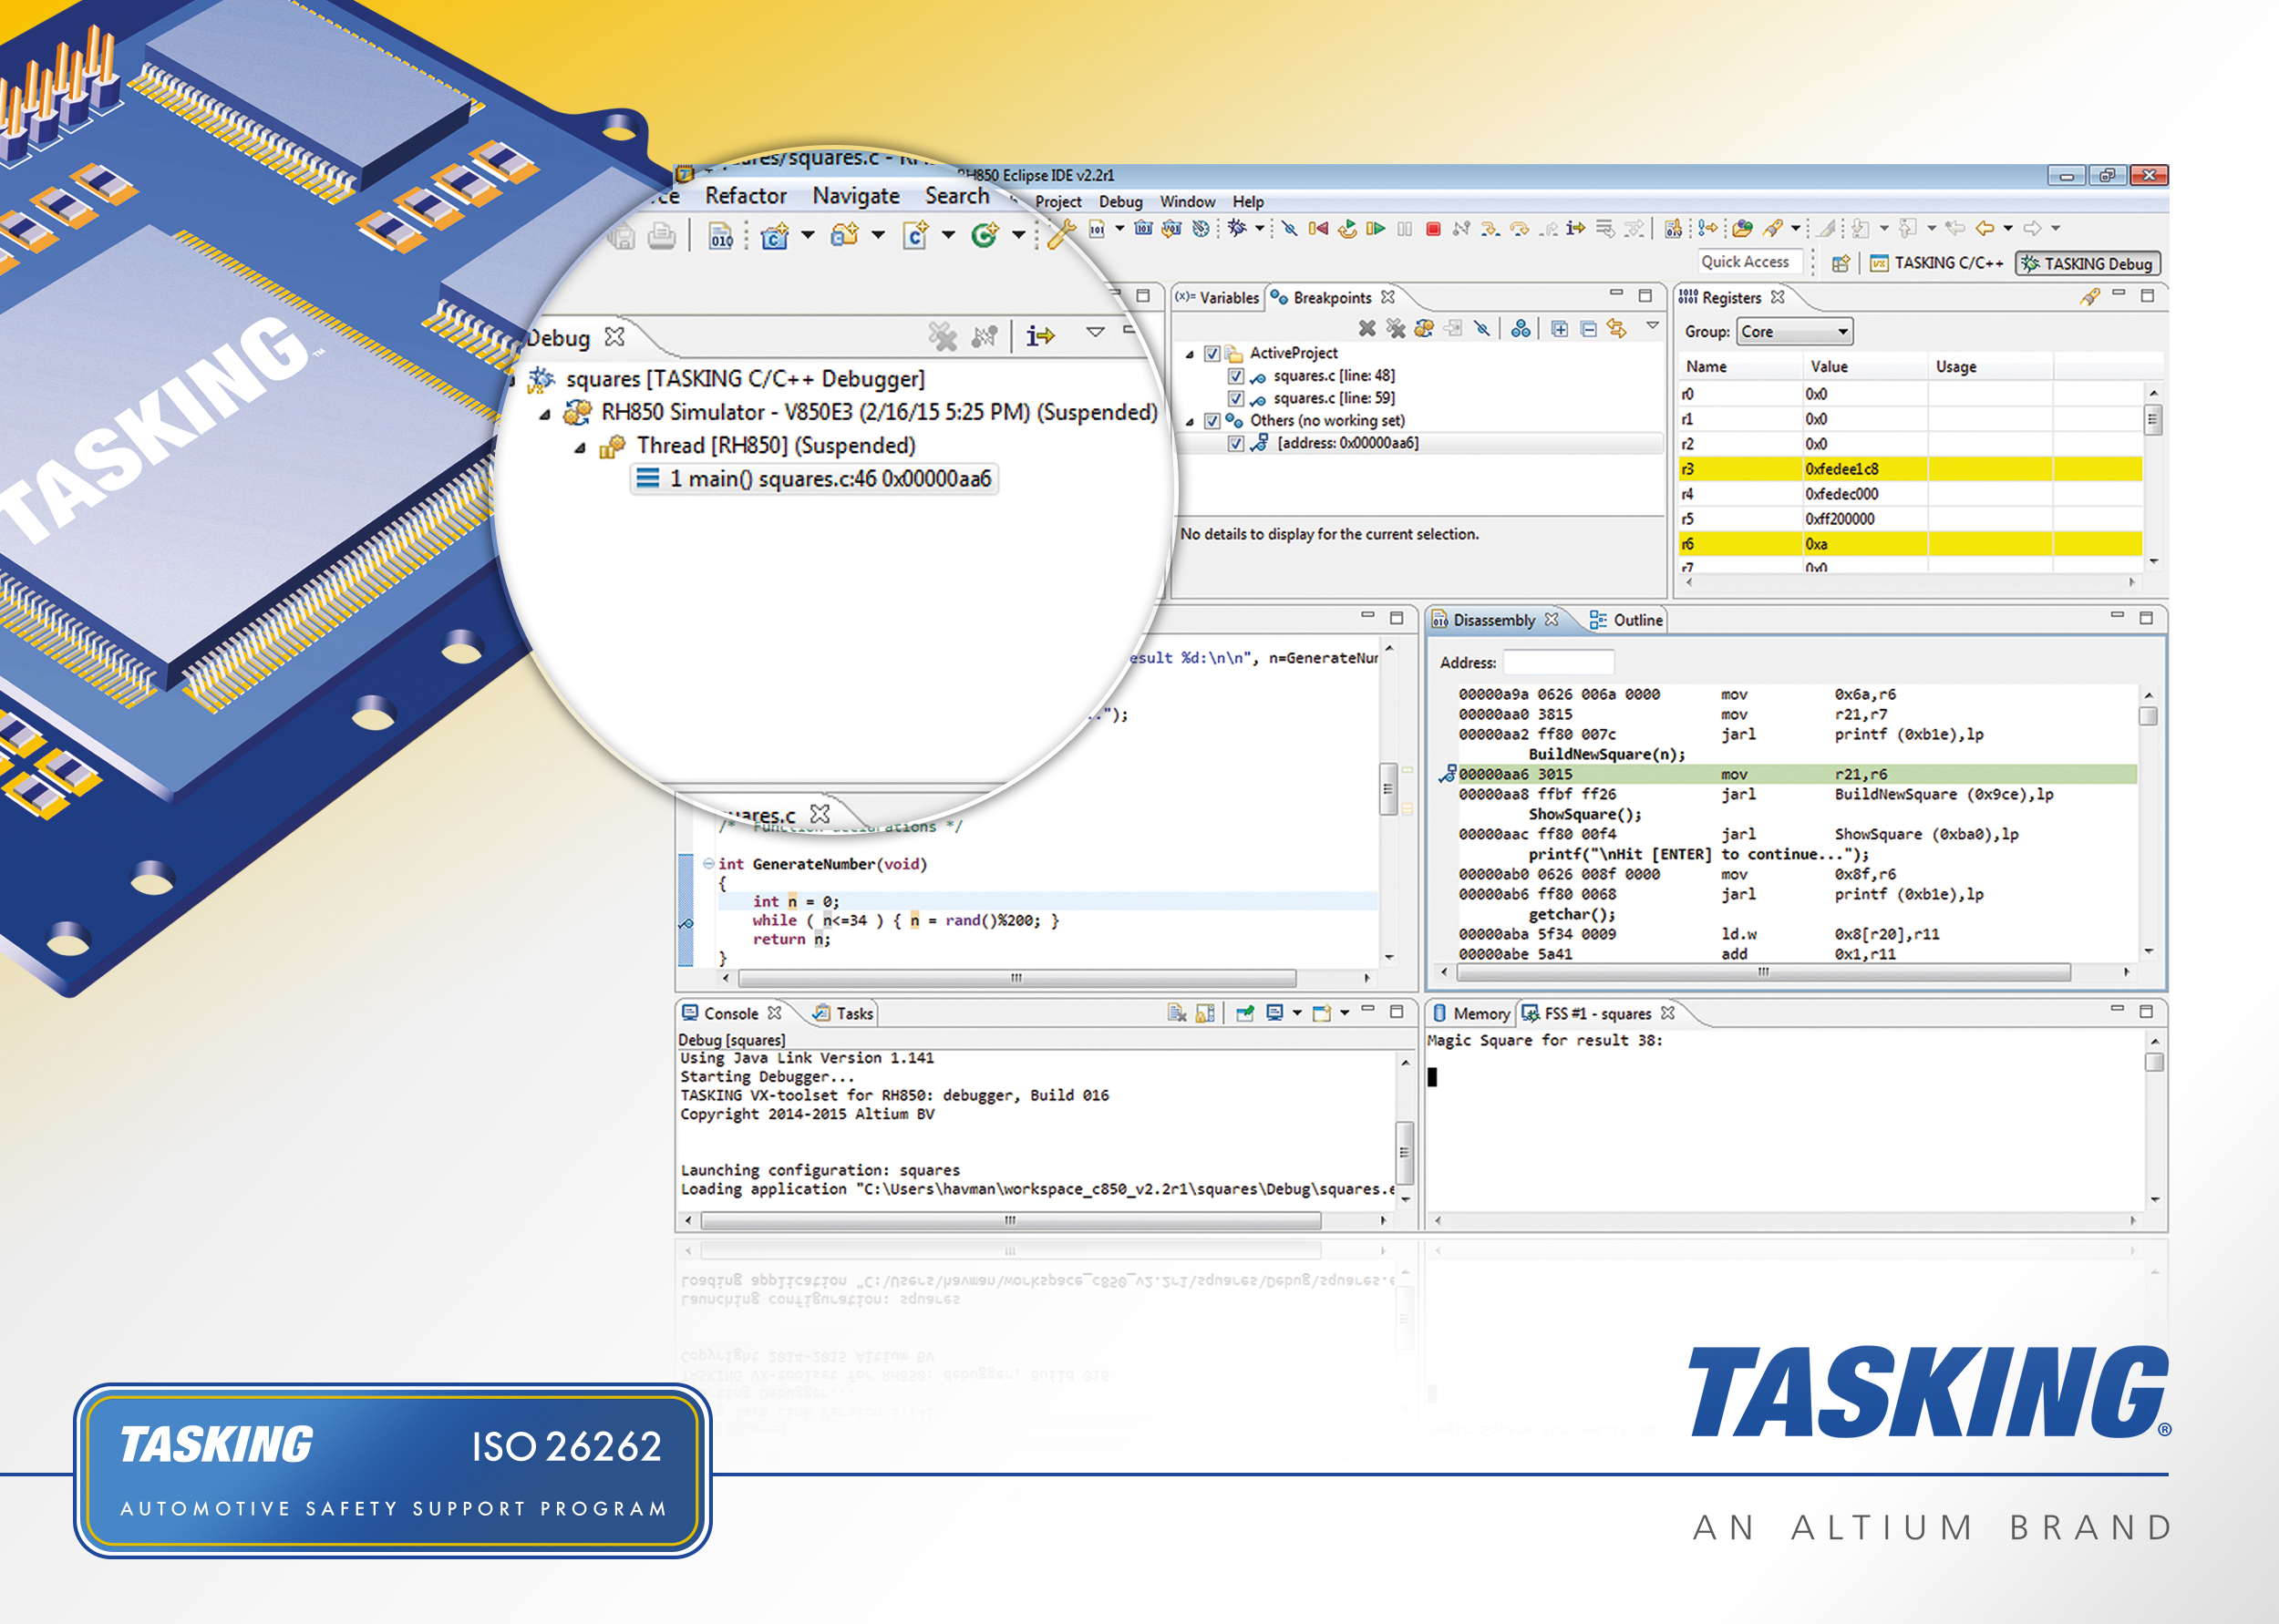 Downloadable Image: New TASKING Release for RH850